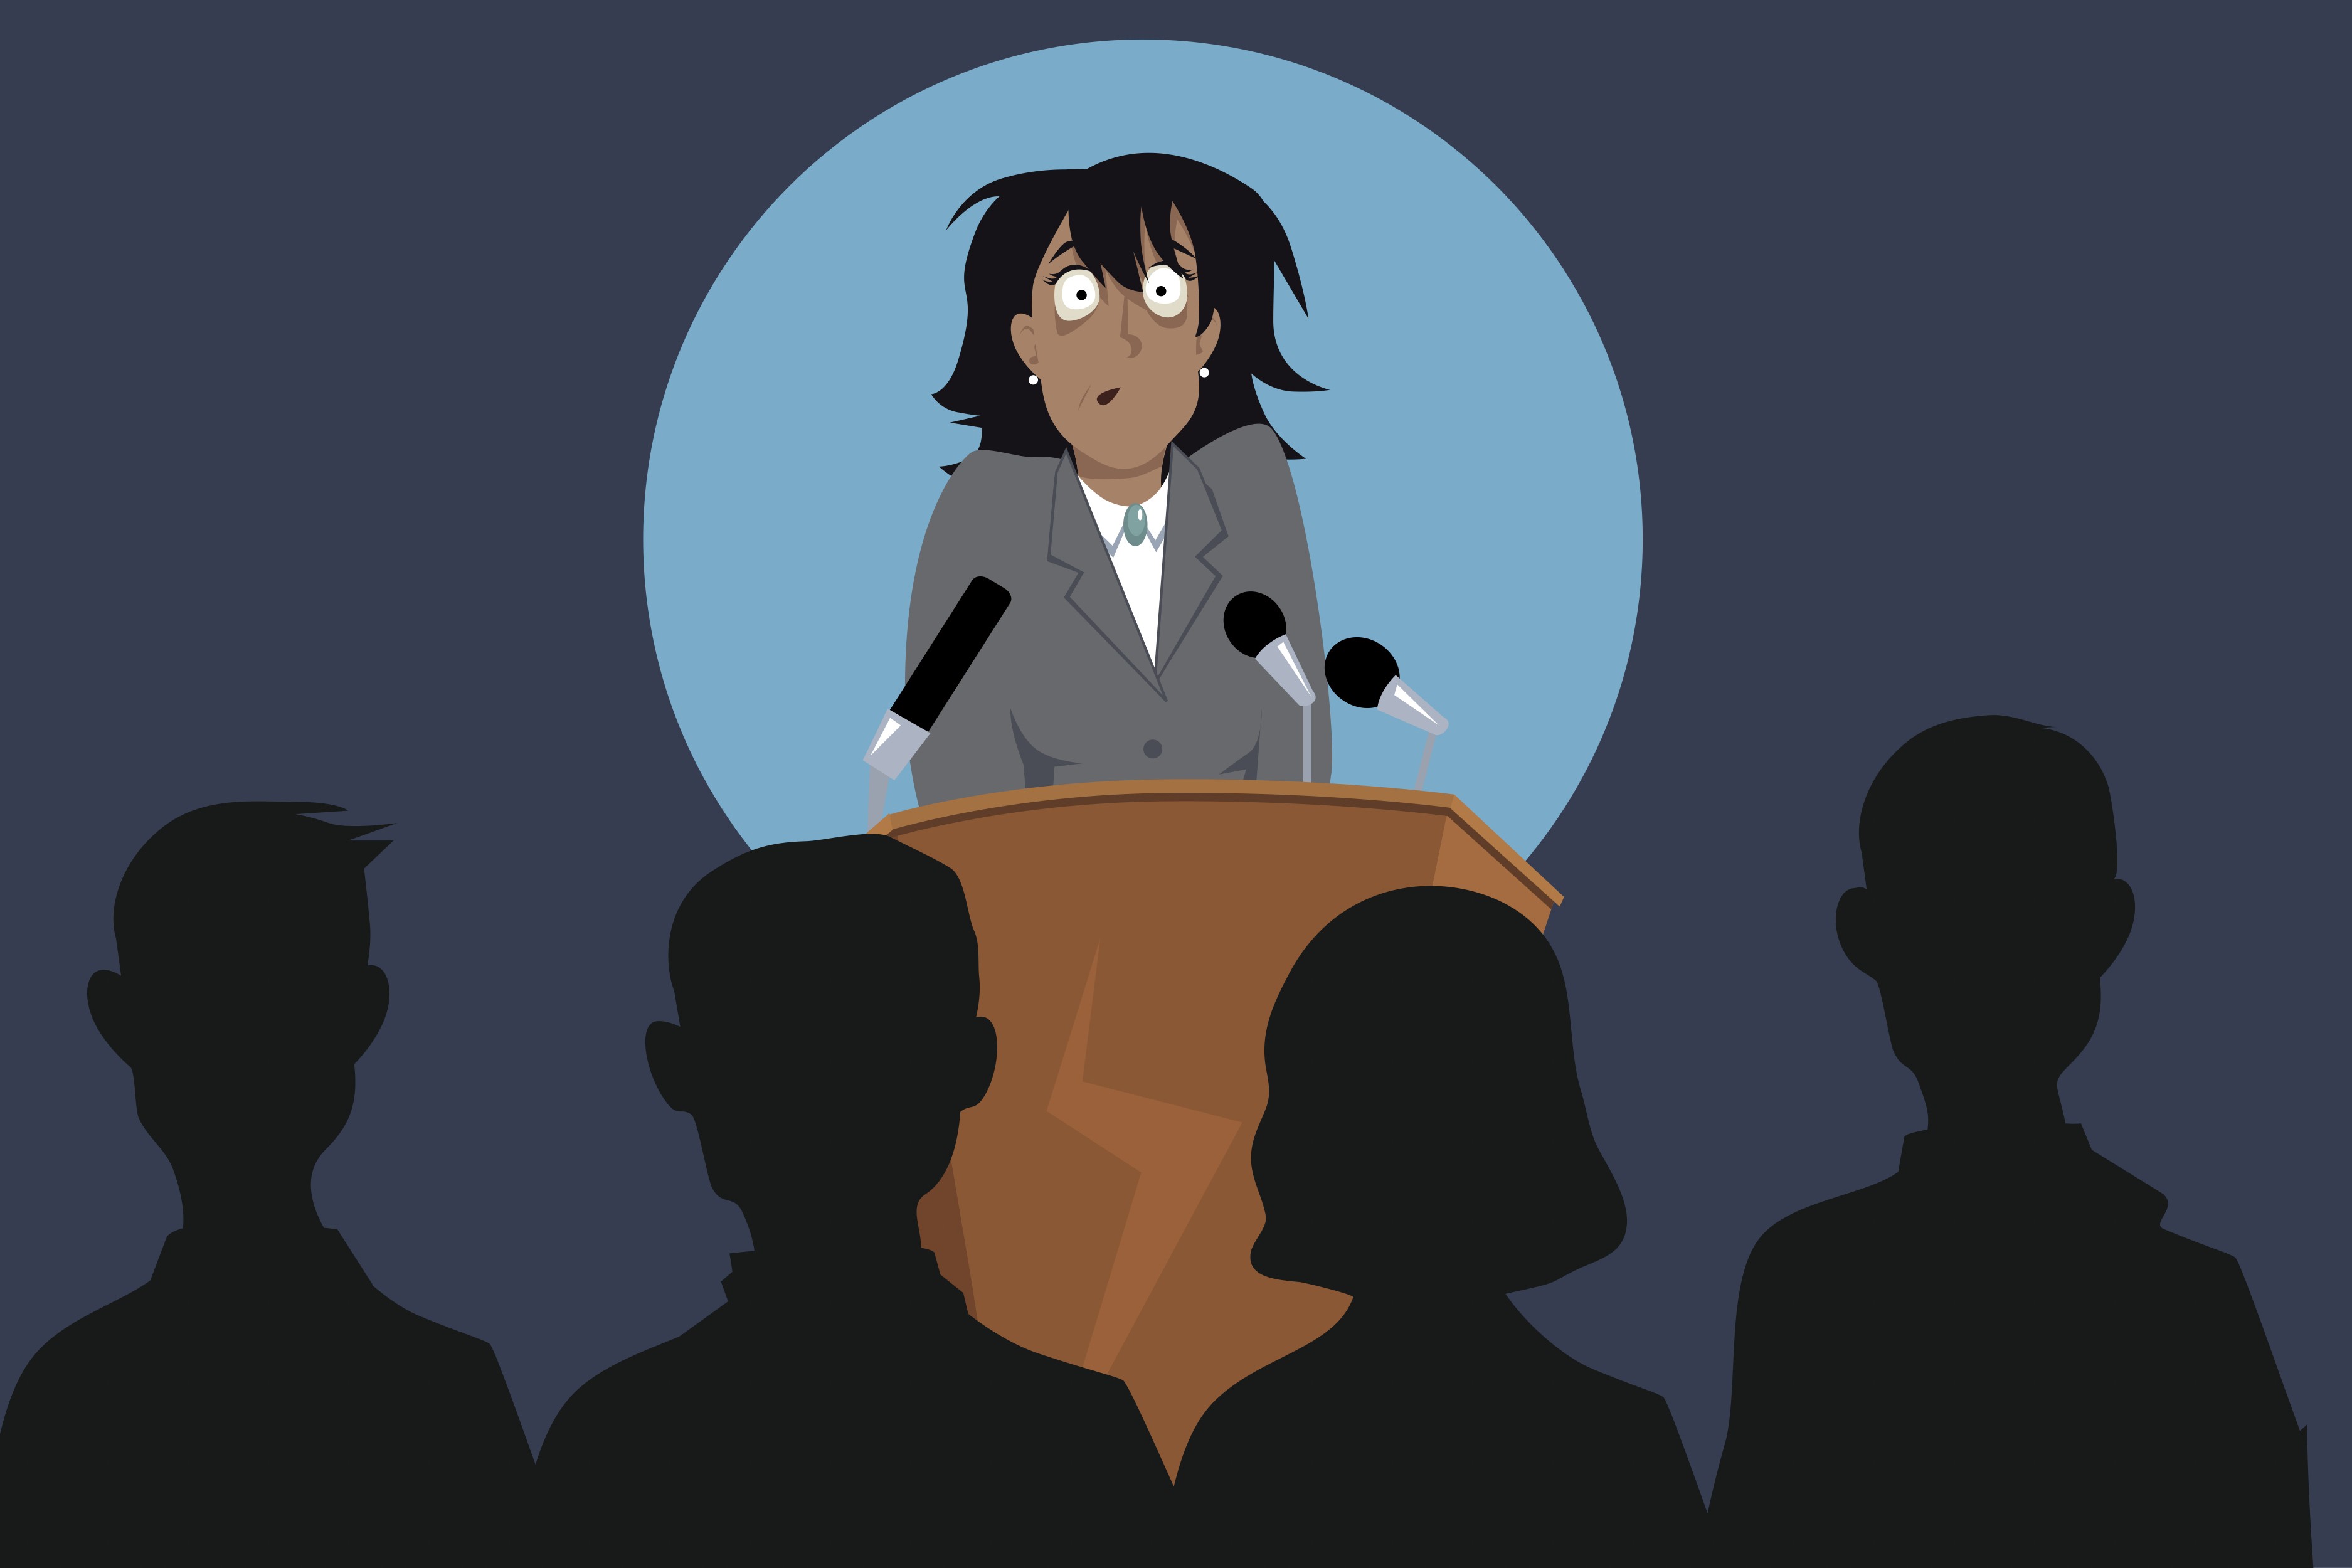 how to remove fear of public speaking